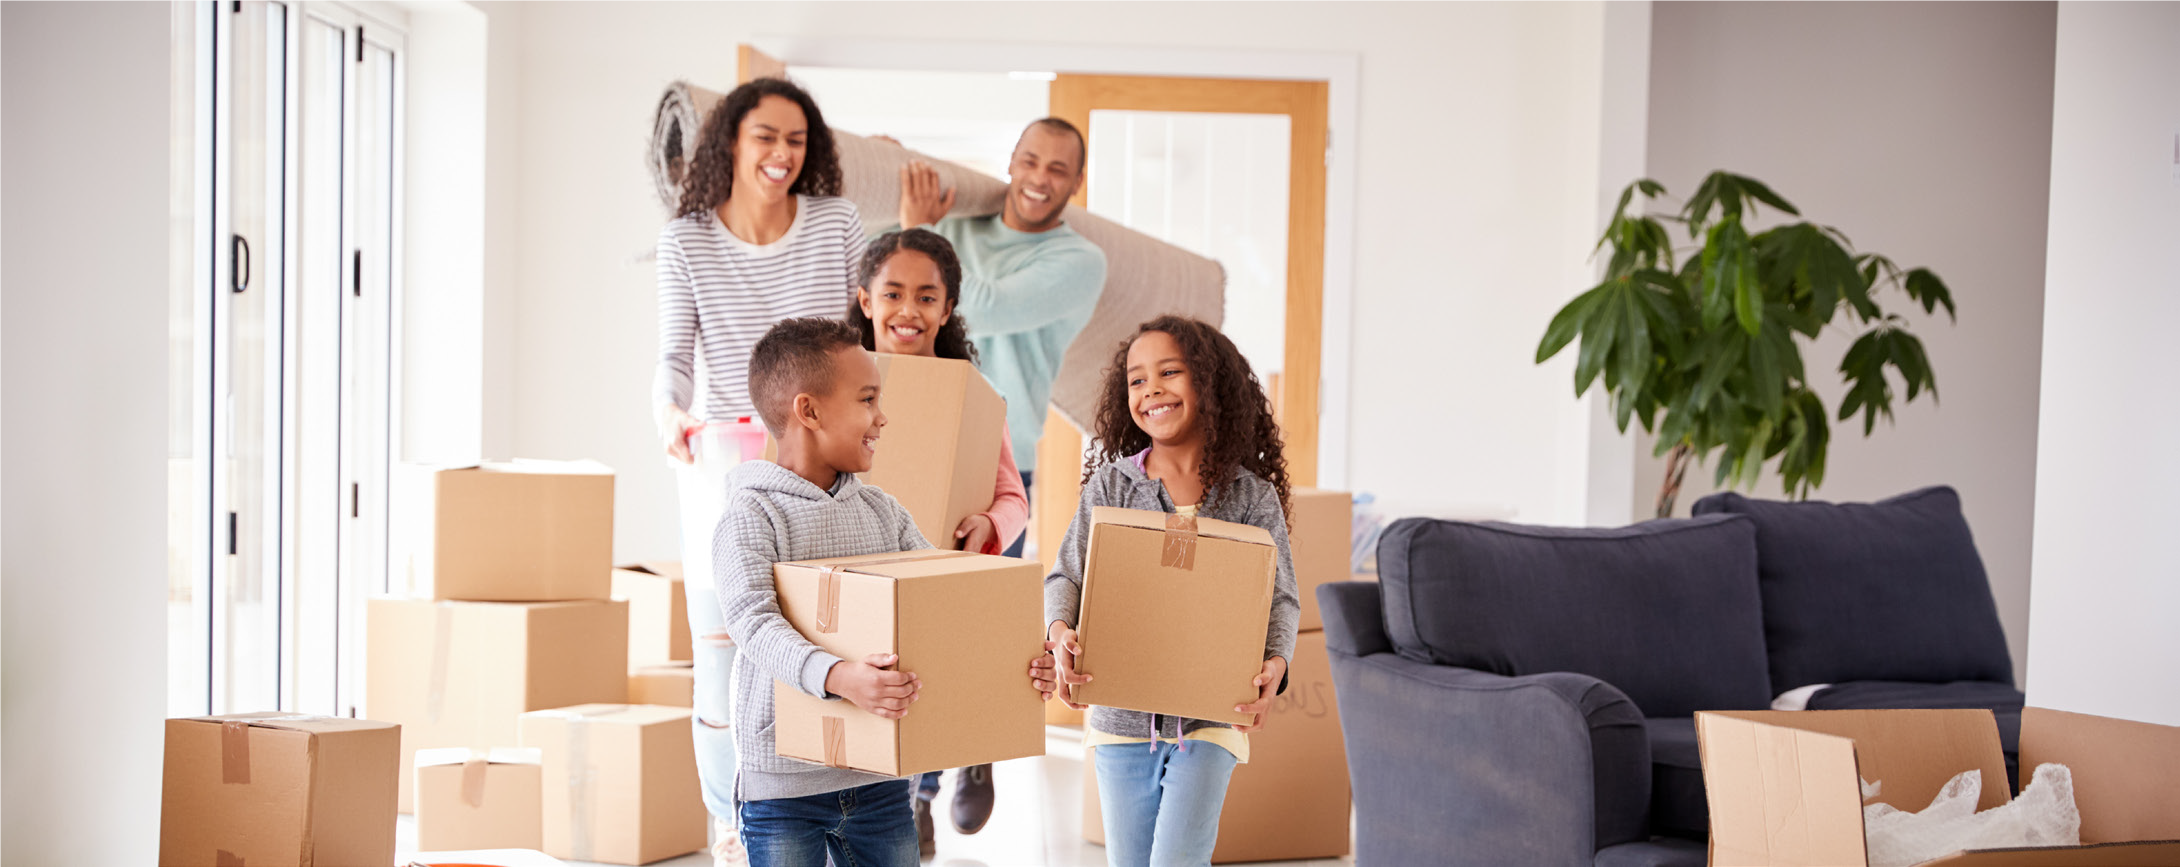 Photo of a laughing family (two adults, three children), surrounded by packing boxes in their new home.